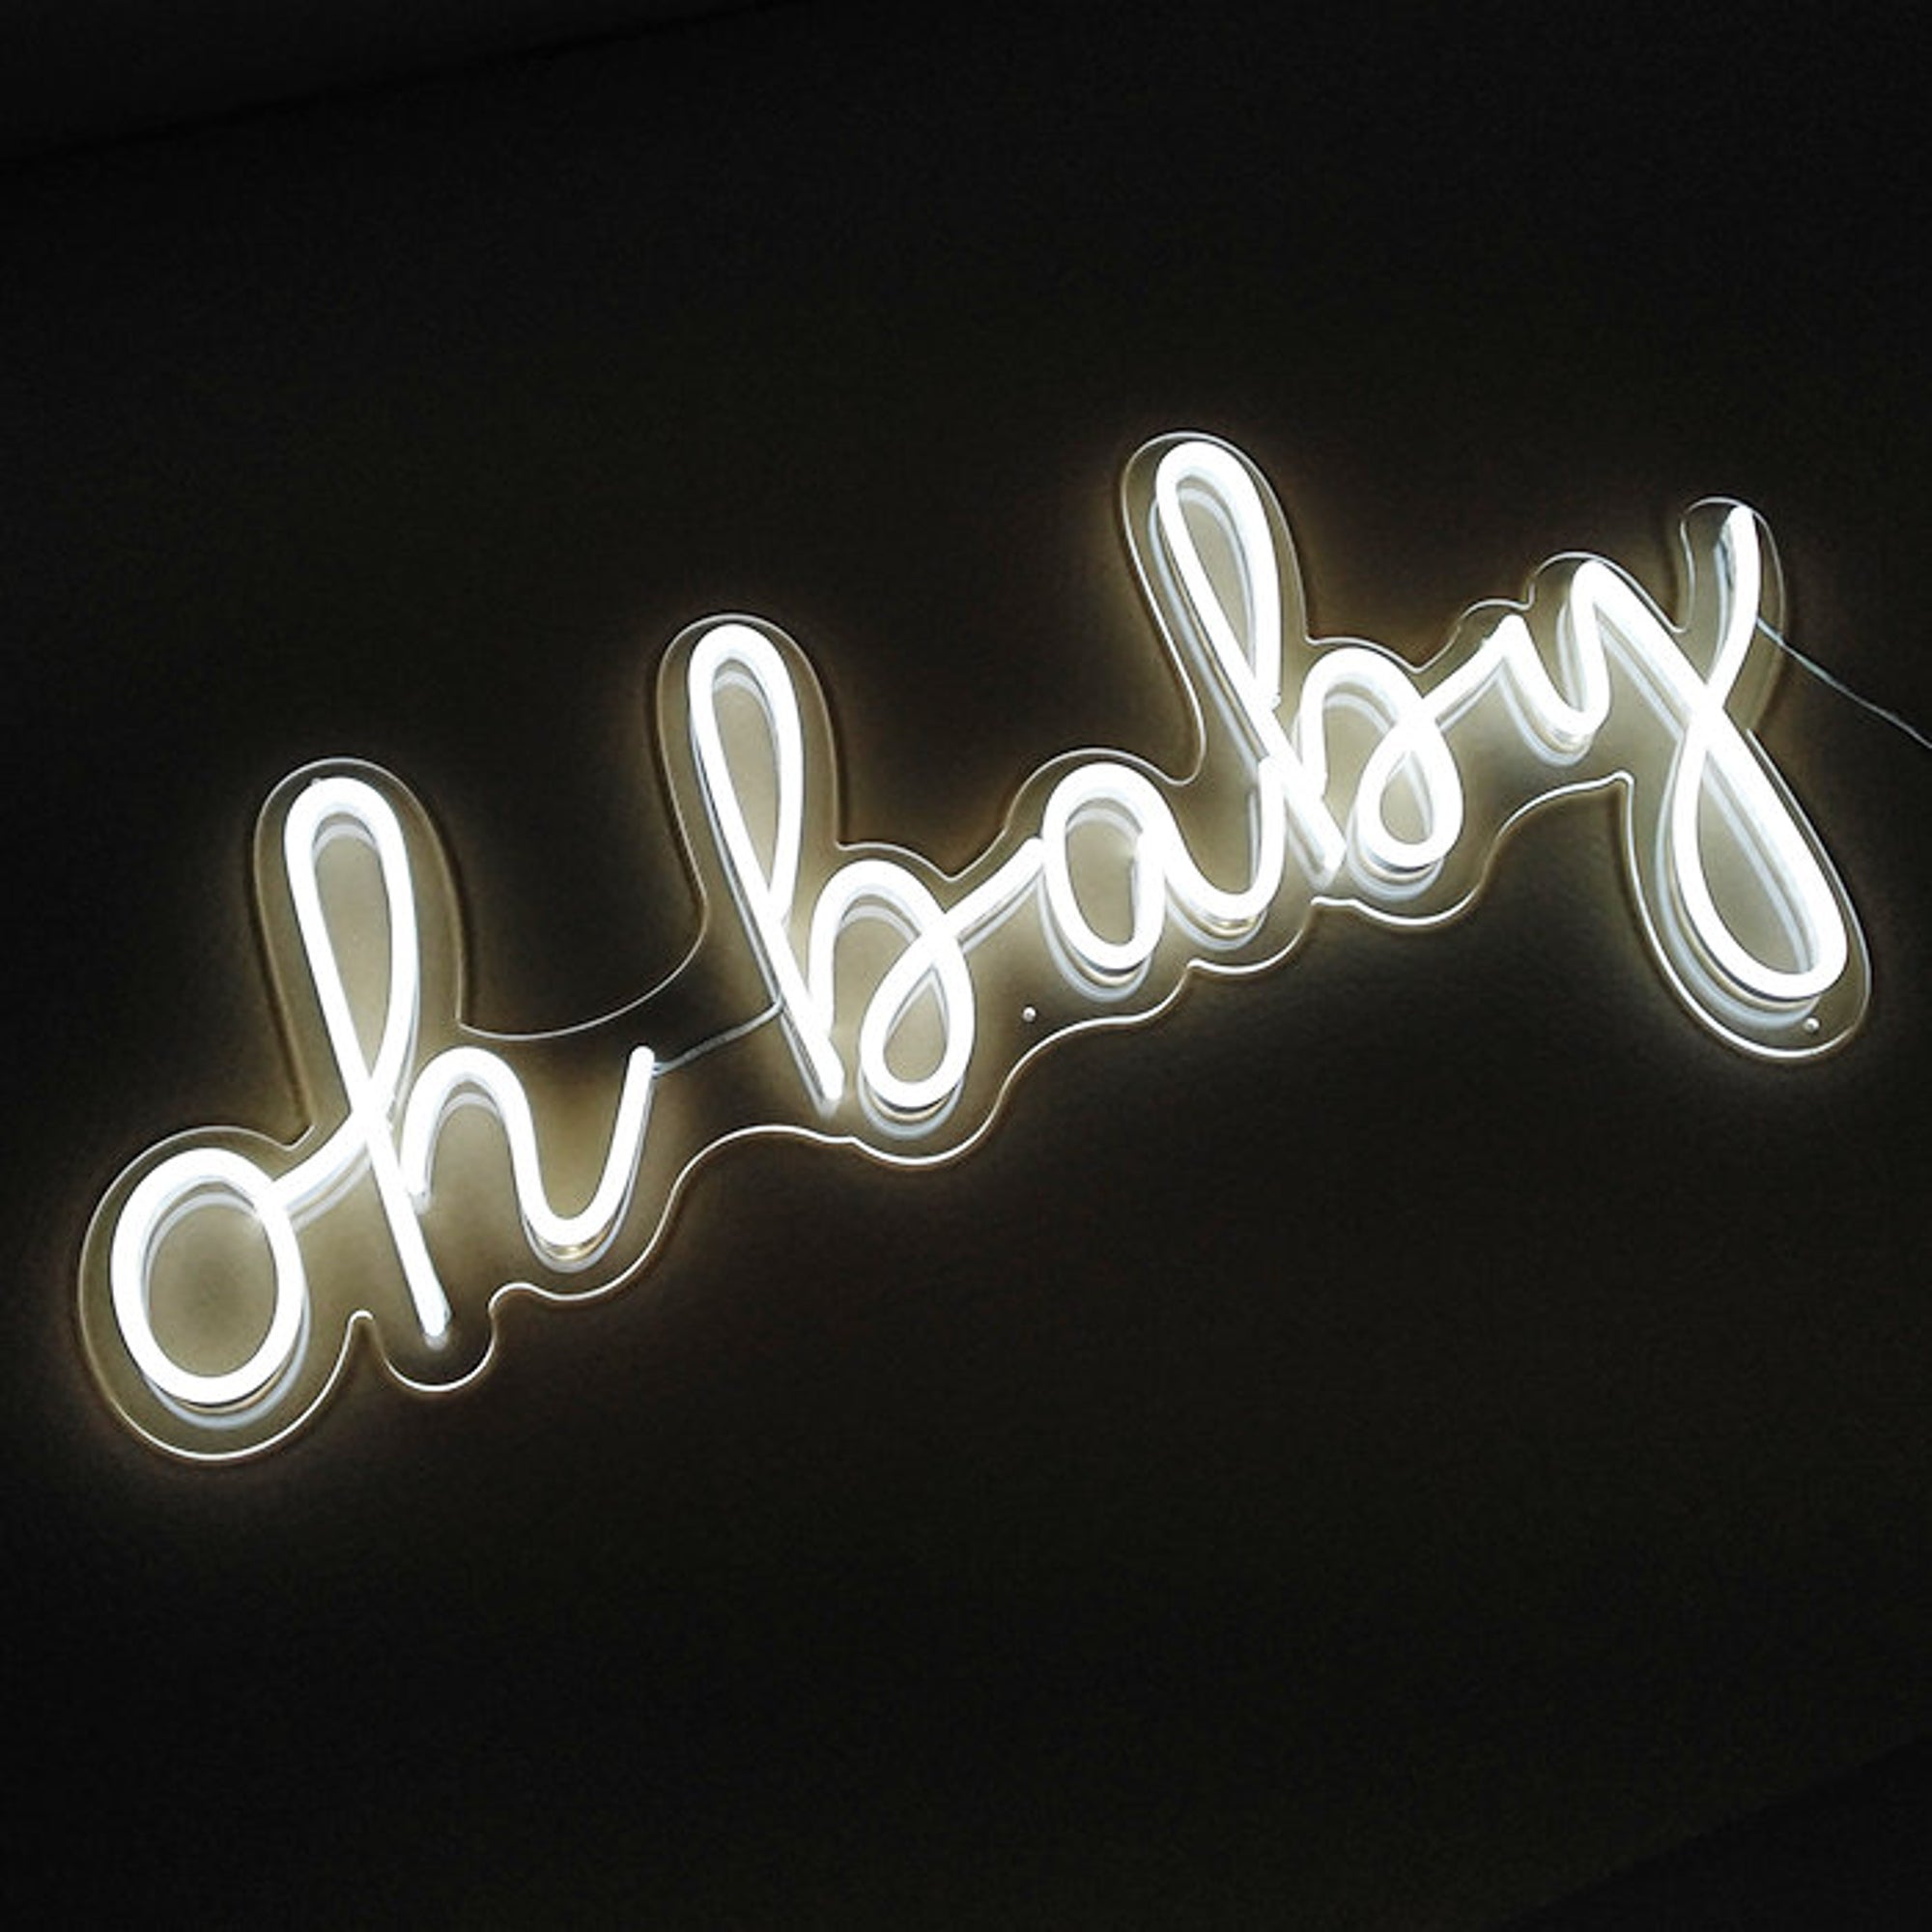 oh baby neon sign,custom neon signs,